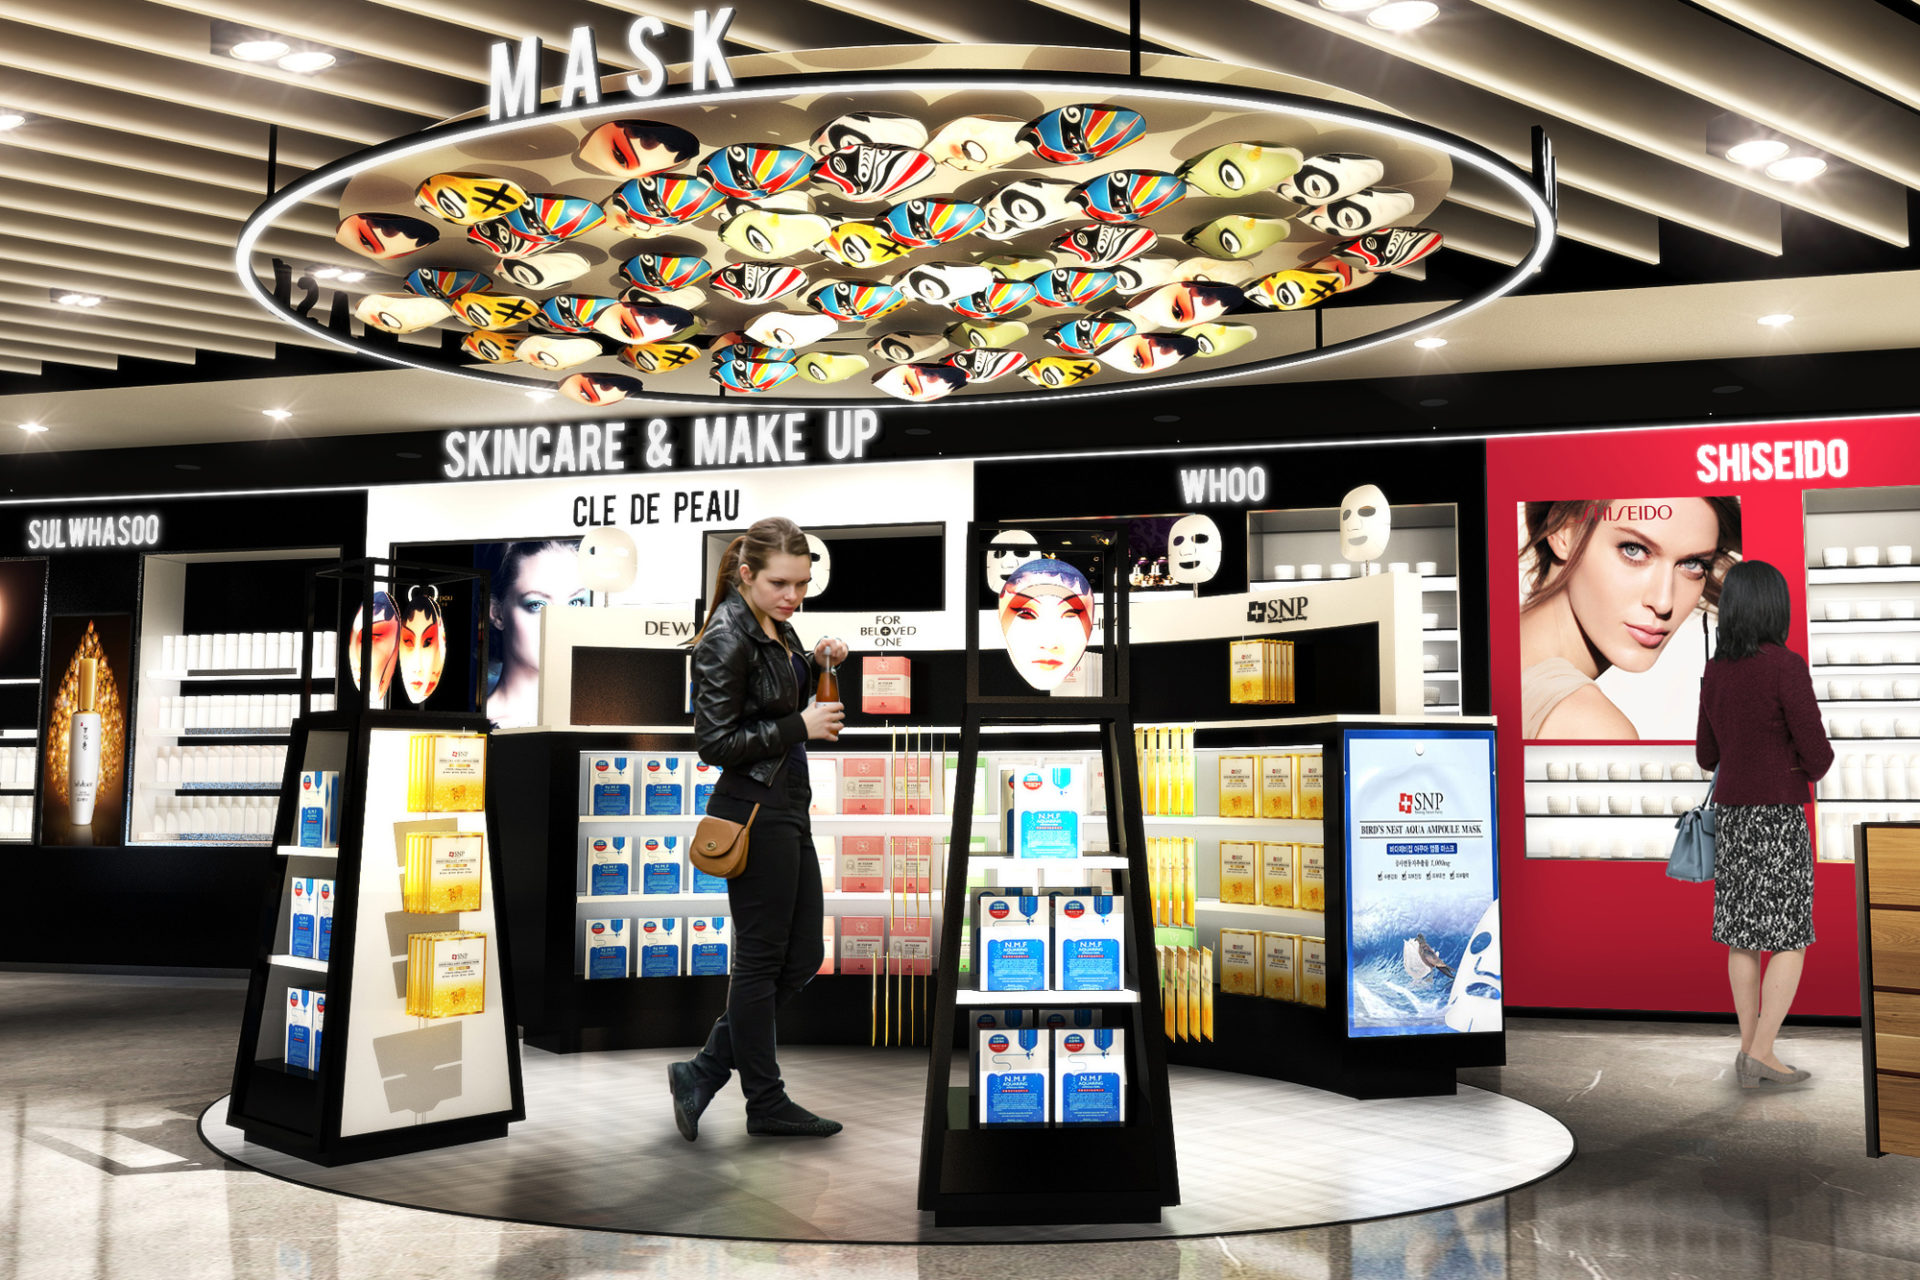 Hong Kong airport POS brand display and commercial activation